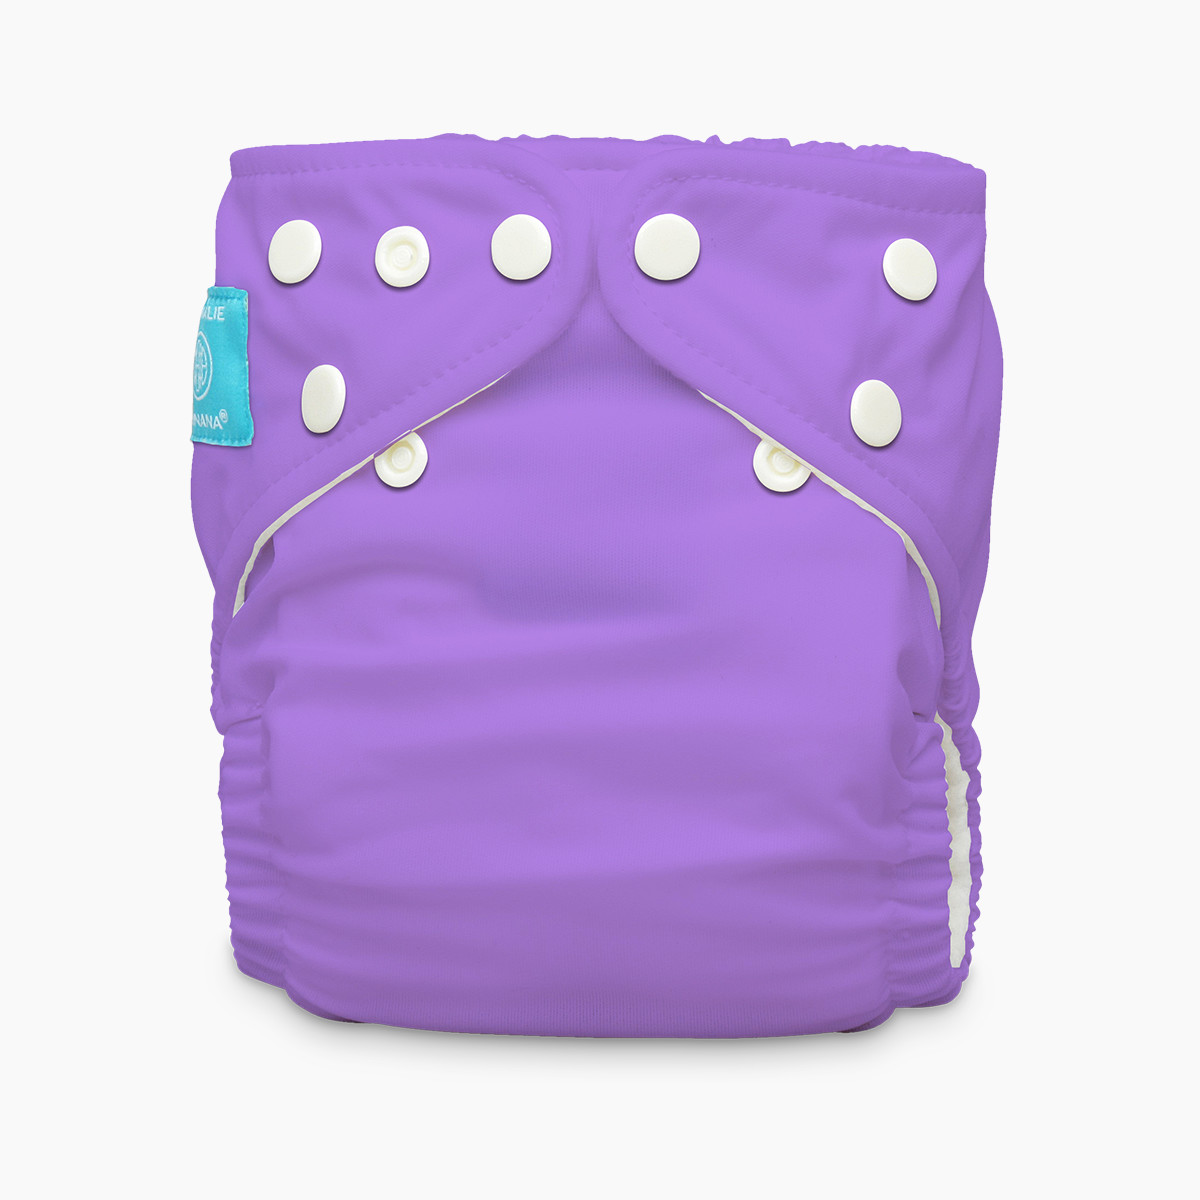 Charlie Banana One-size Reusable Cloth Diaper with 2 Reusable Inserts - Lavender.